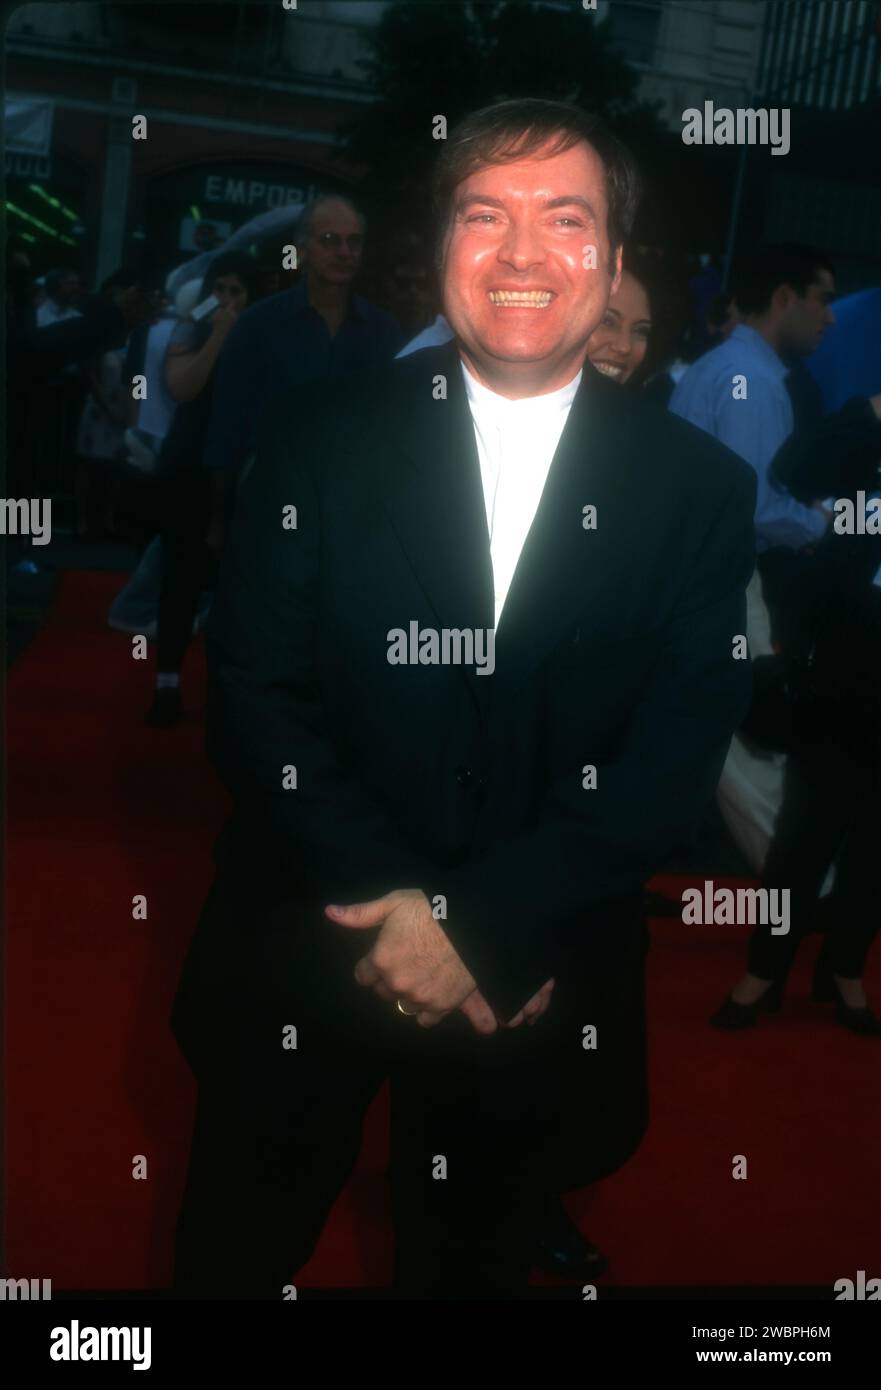 Los Angeles, California, USA 10th November 1996 Billy West attends Warner Bros. Space Jam Premiere at MannÕs Chinese Theatre on November 10, 1996 in Los Angeles, California, USA. Photo by Barry King/Alamy Stock Photo Stock Photo